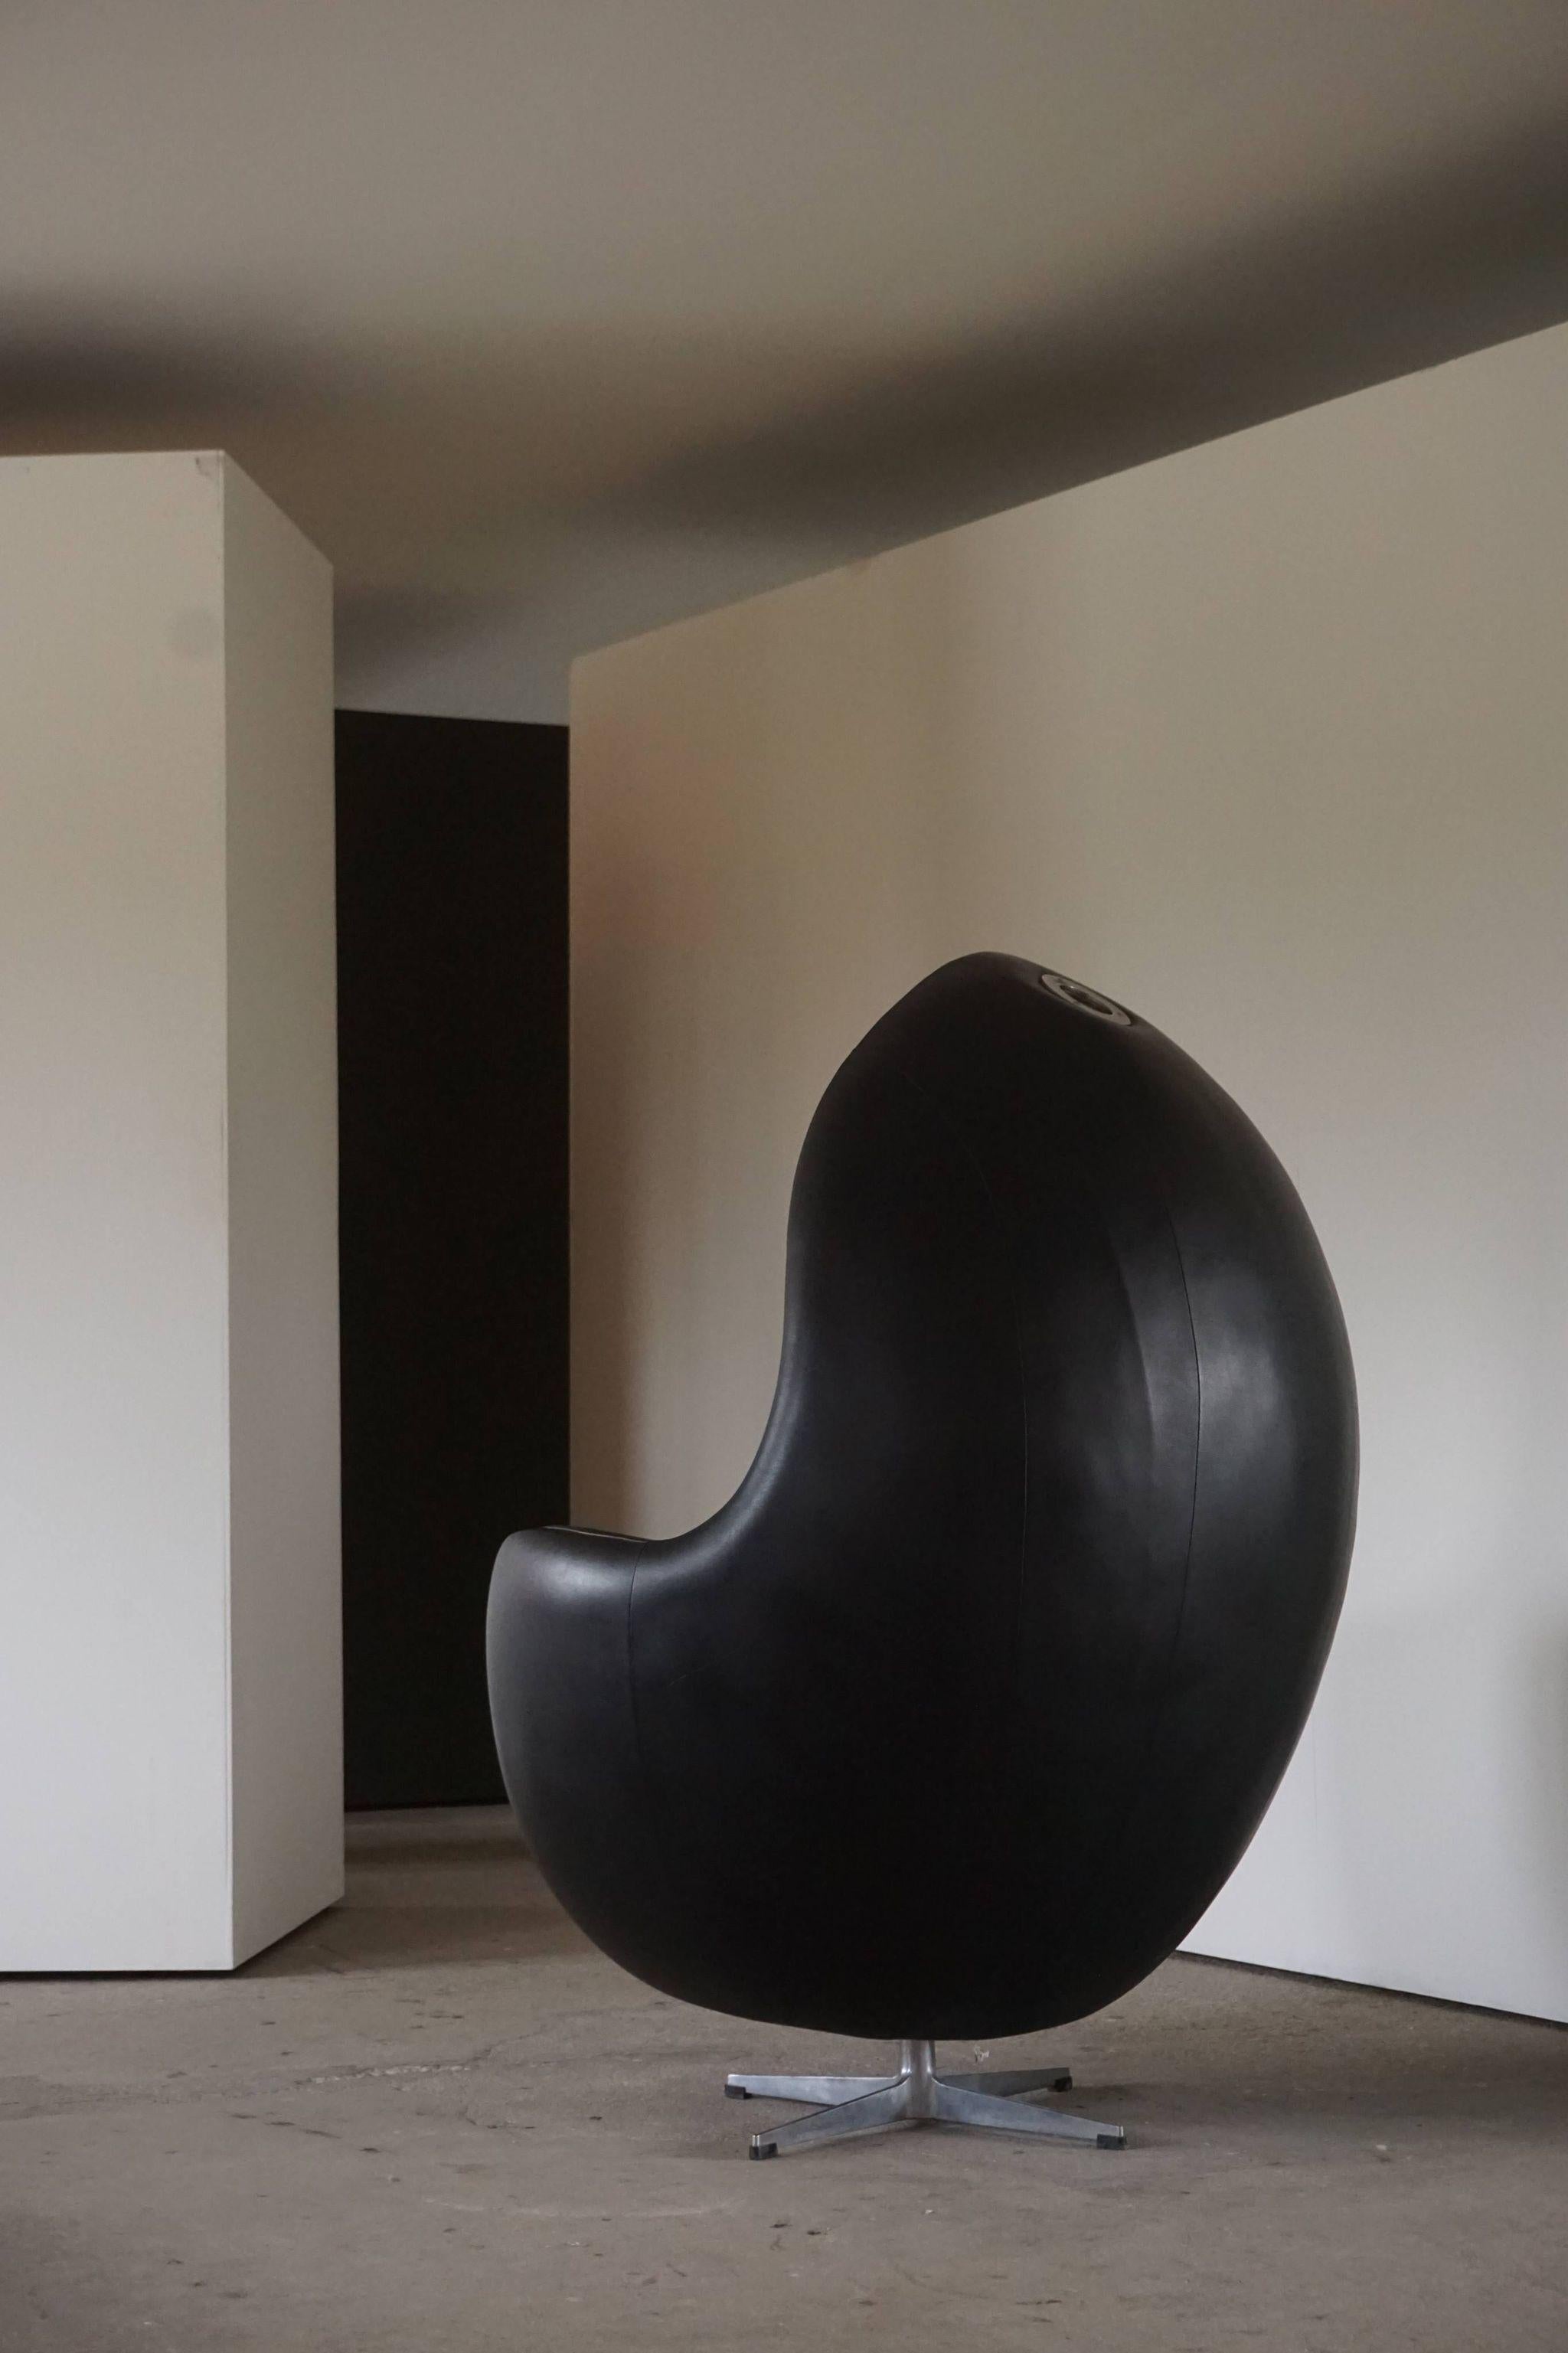 Space Age Funky European Space Chair in Leather and Lambwool, Shaped like an Egg, 1980s